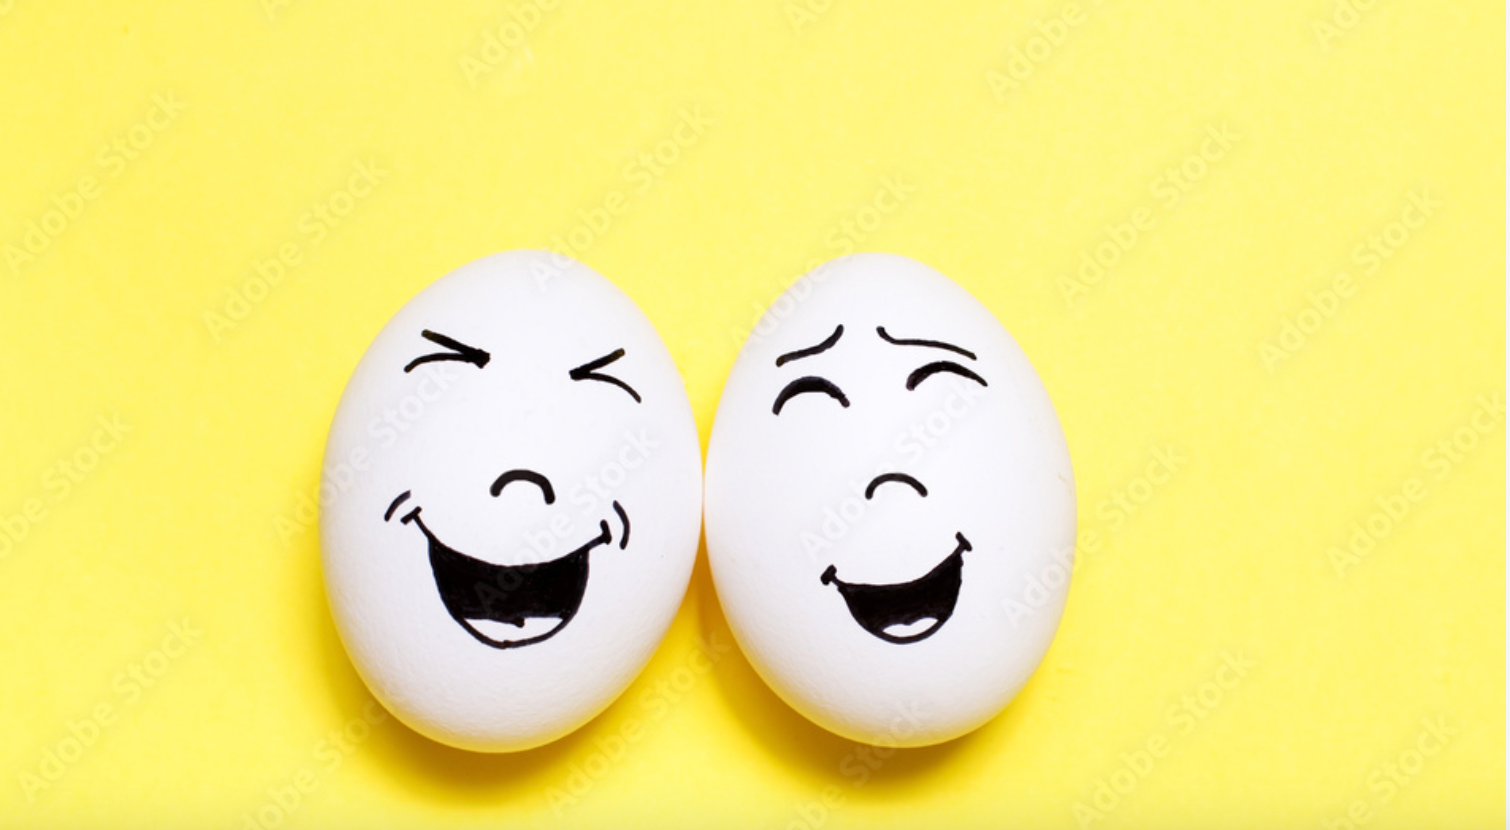 Two eggs with drawn laughing faces on yellow background | Image credit: © - tanchess © - stock.adobe.com 